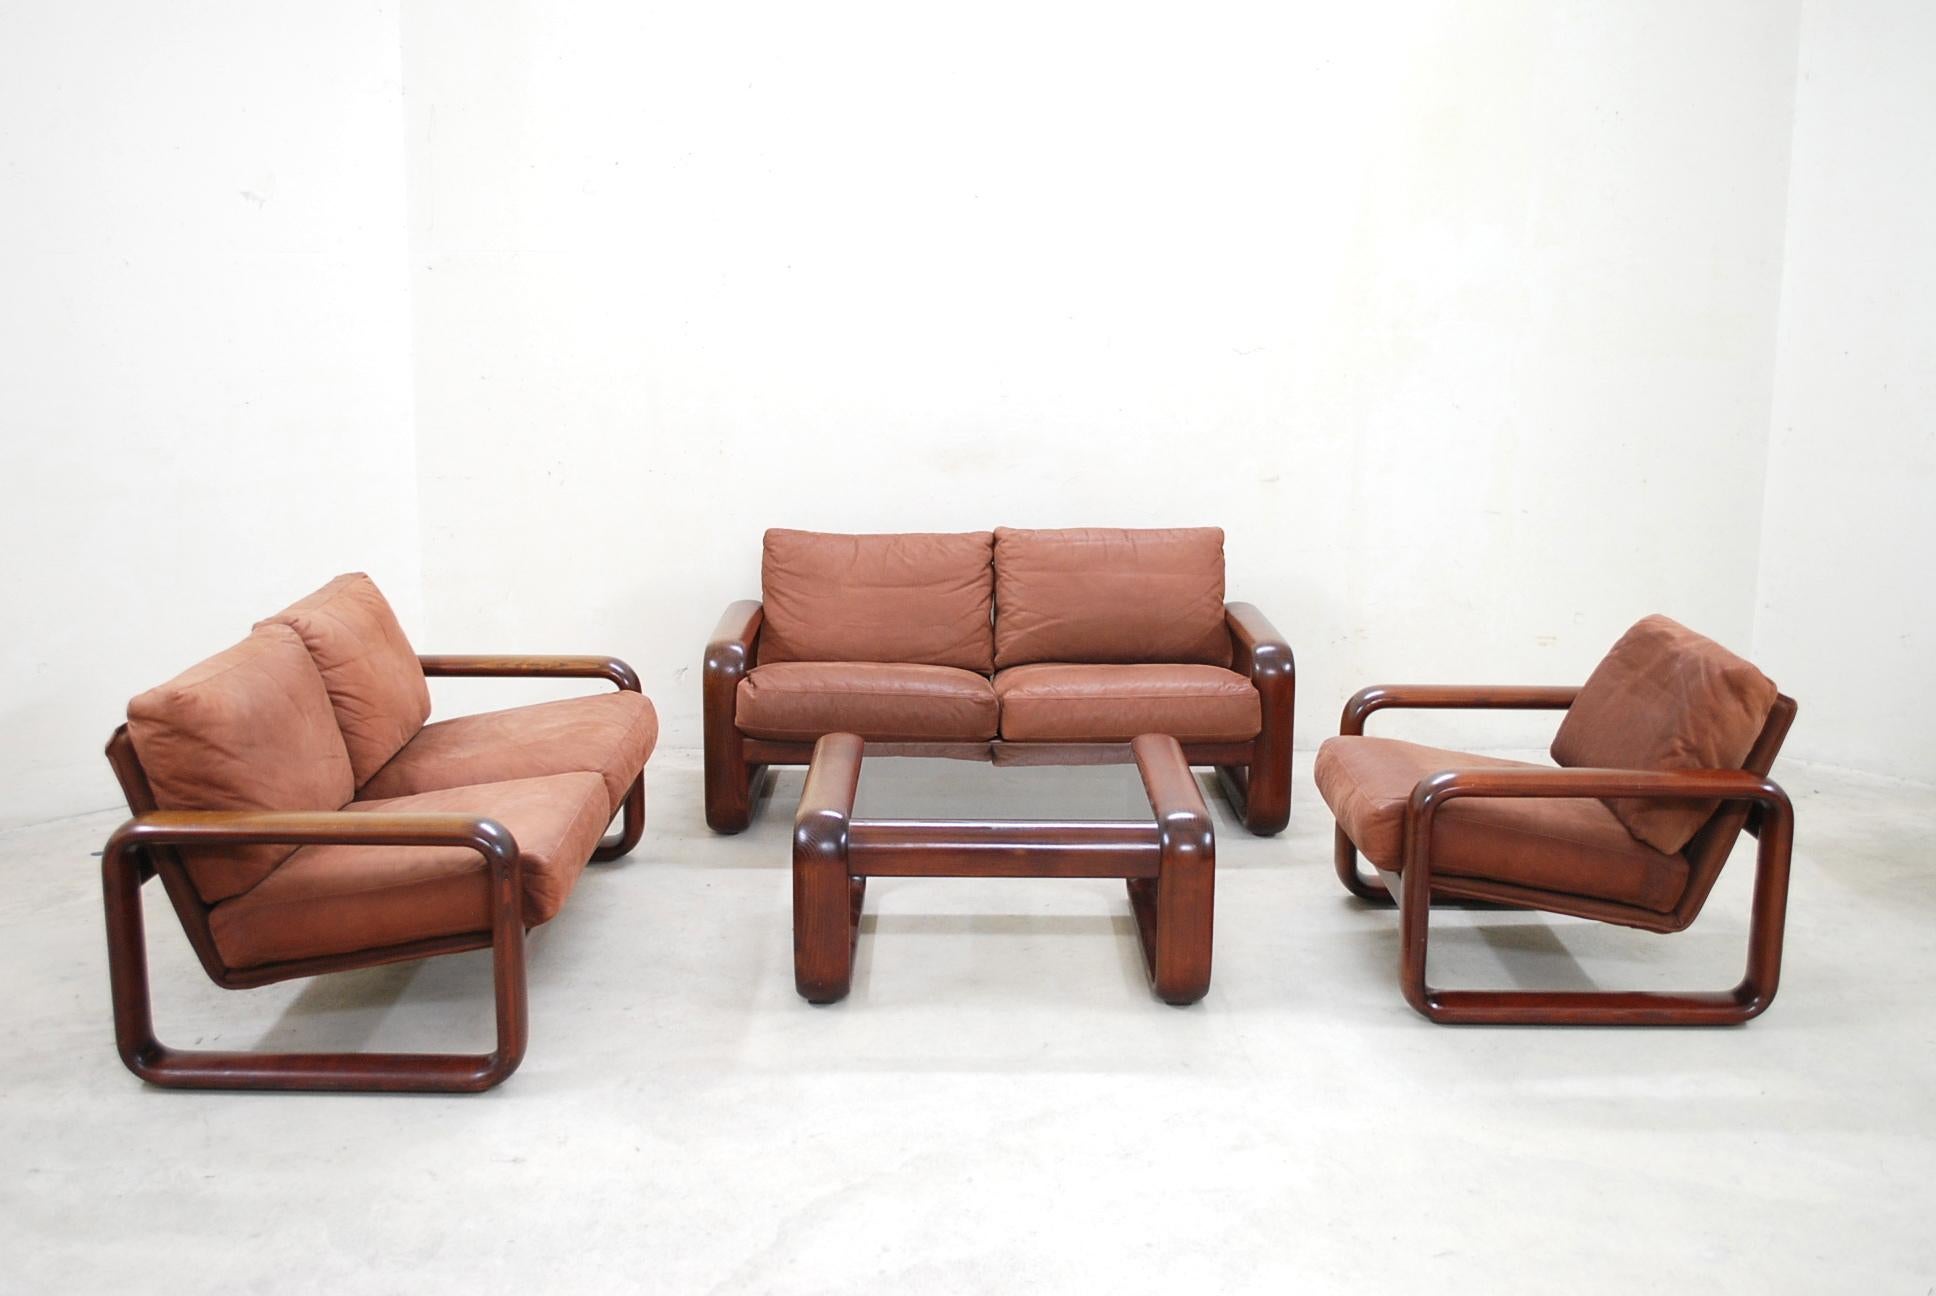 This ensemble was designed by Burkhard Vogtherr 1975 and produced by Rosenthal Einrichtung and consists 2 sofas, 1 armchair, and 1 coffee table.
The model 